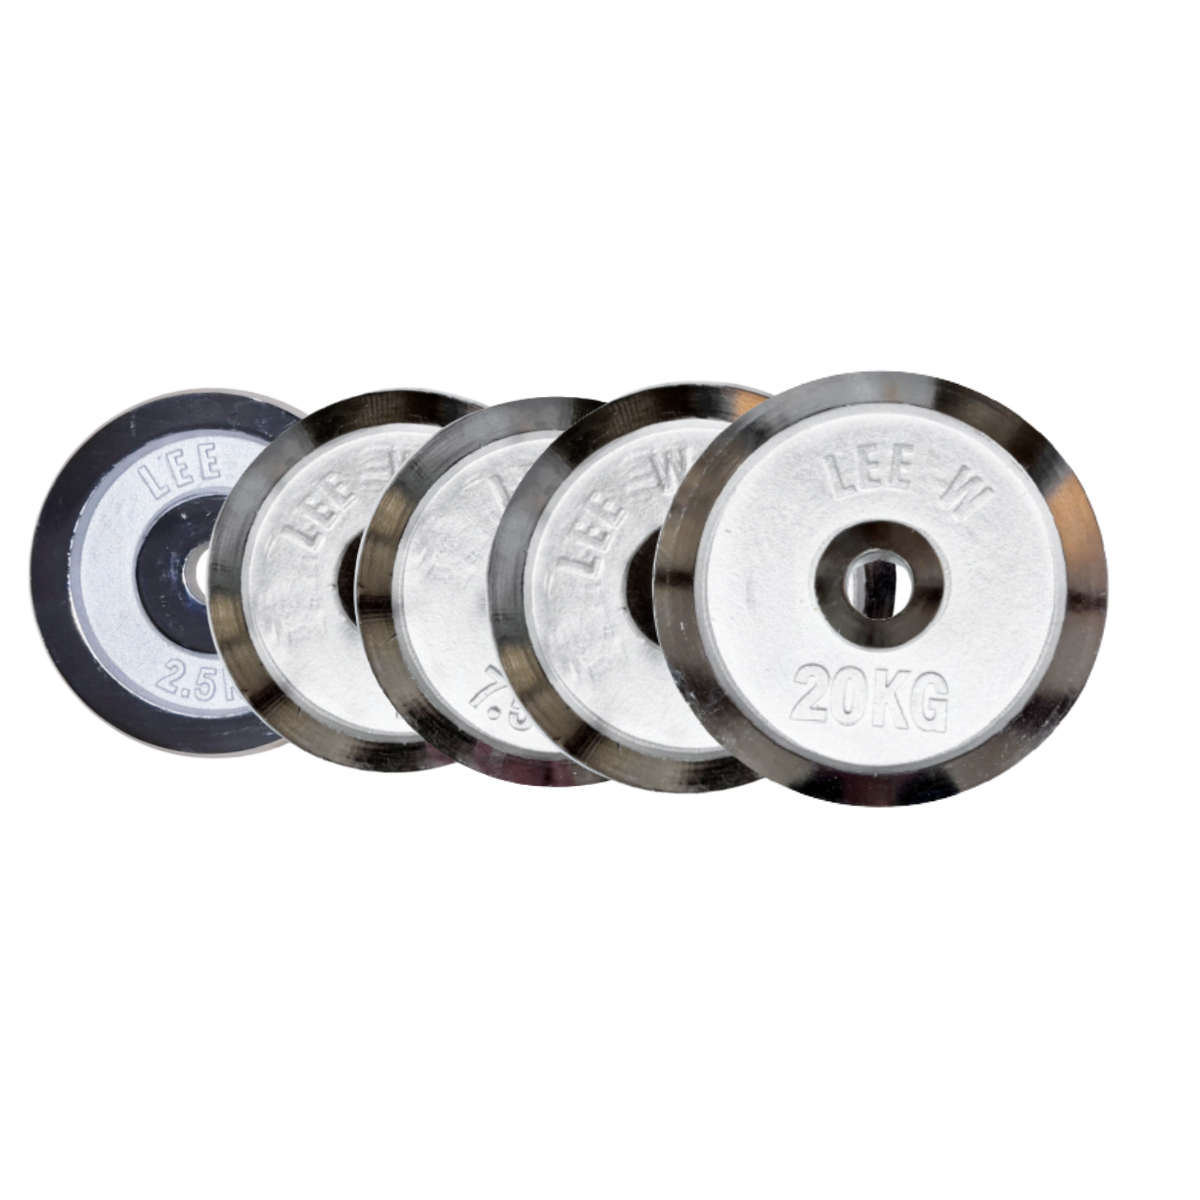 Weight Plates Chrome 25mm